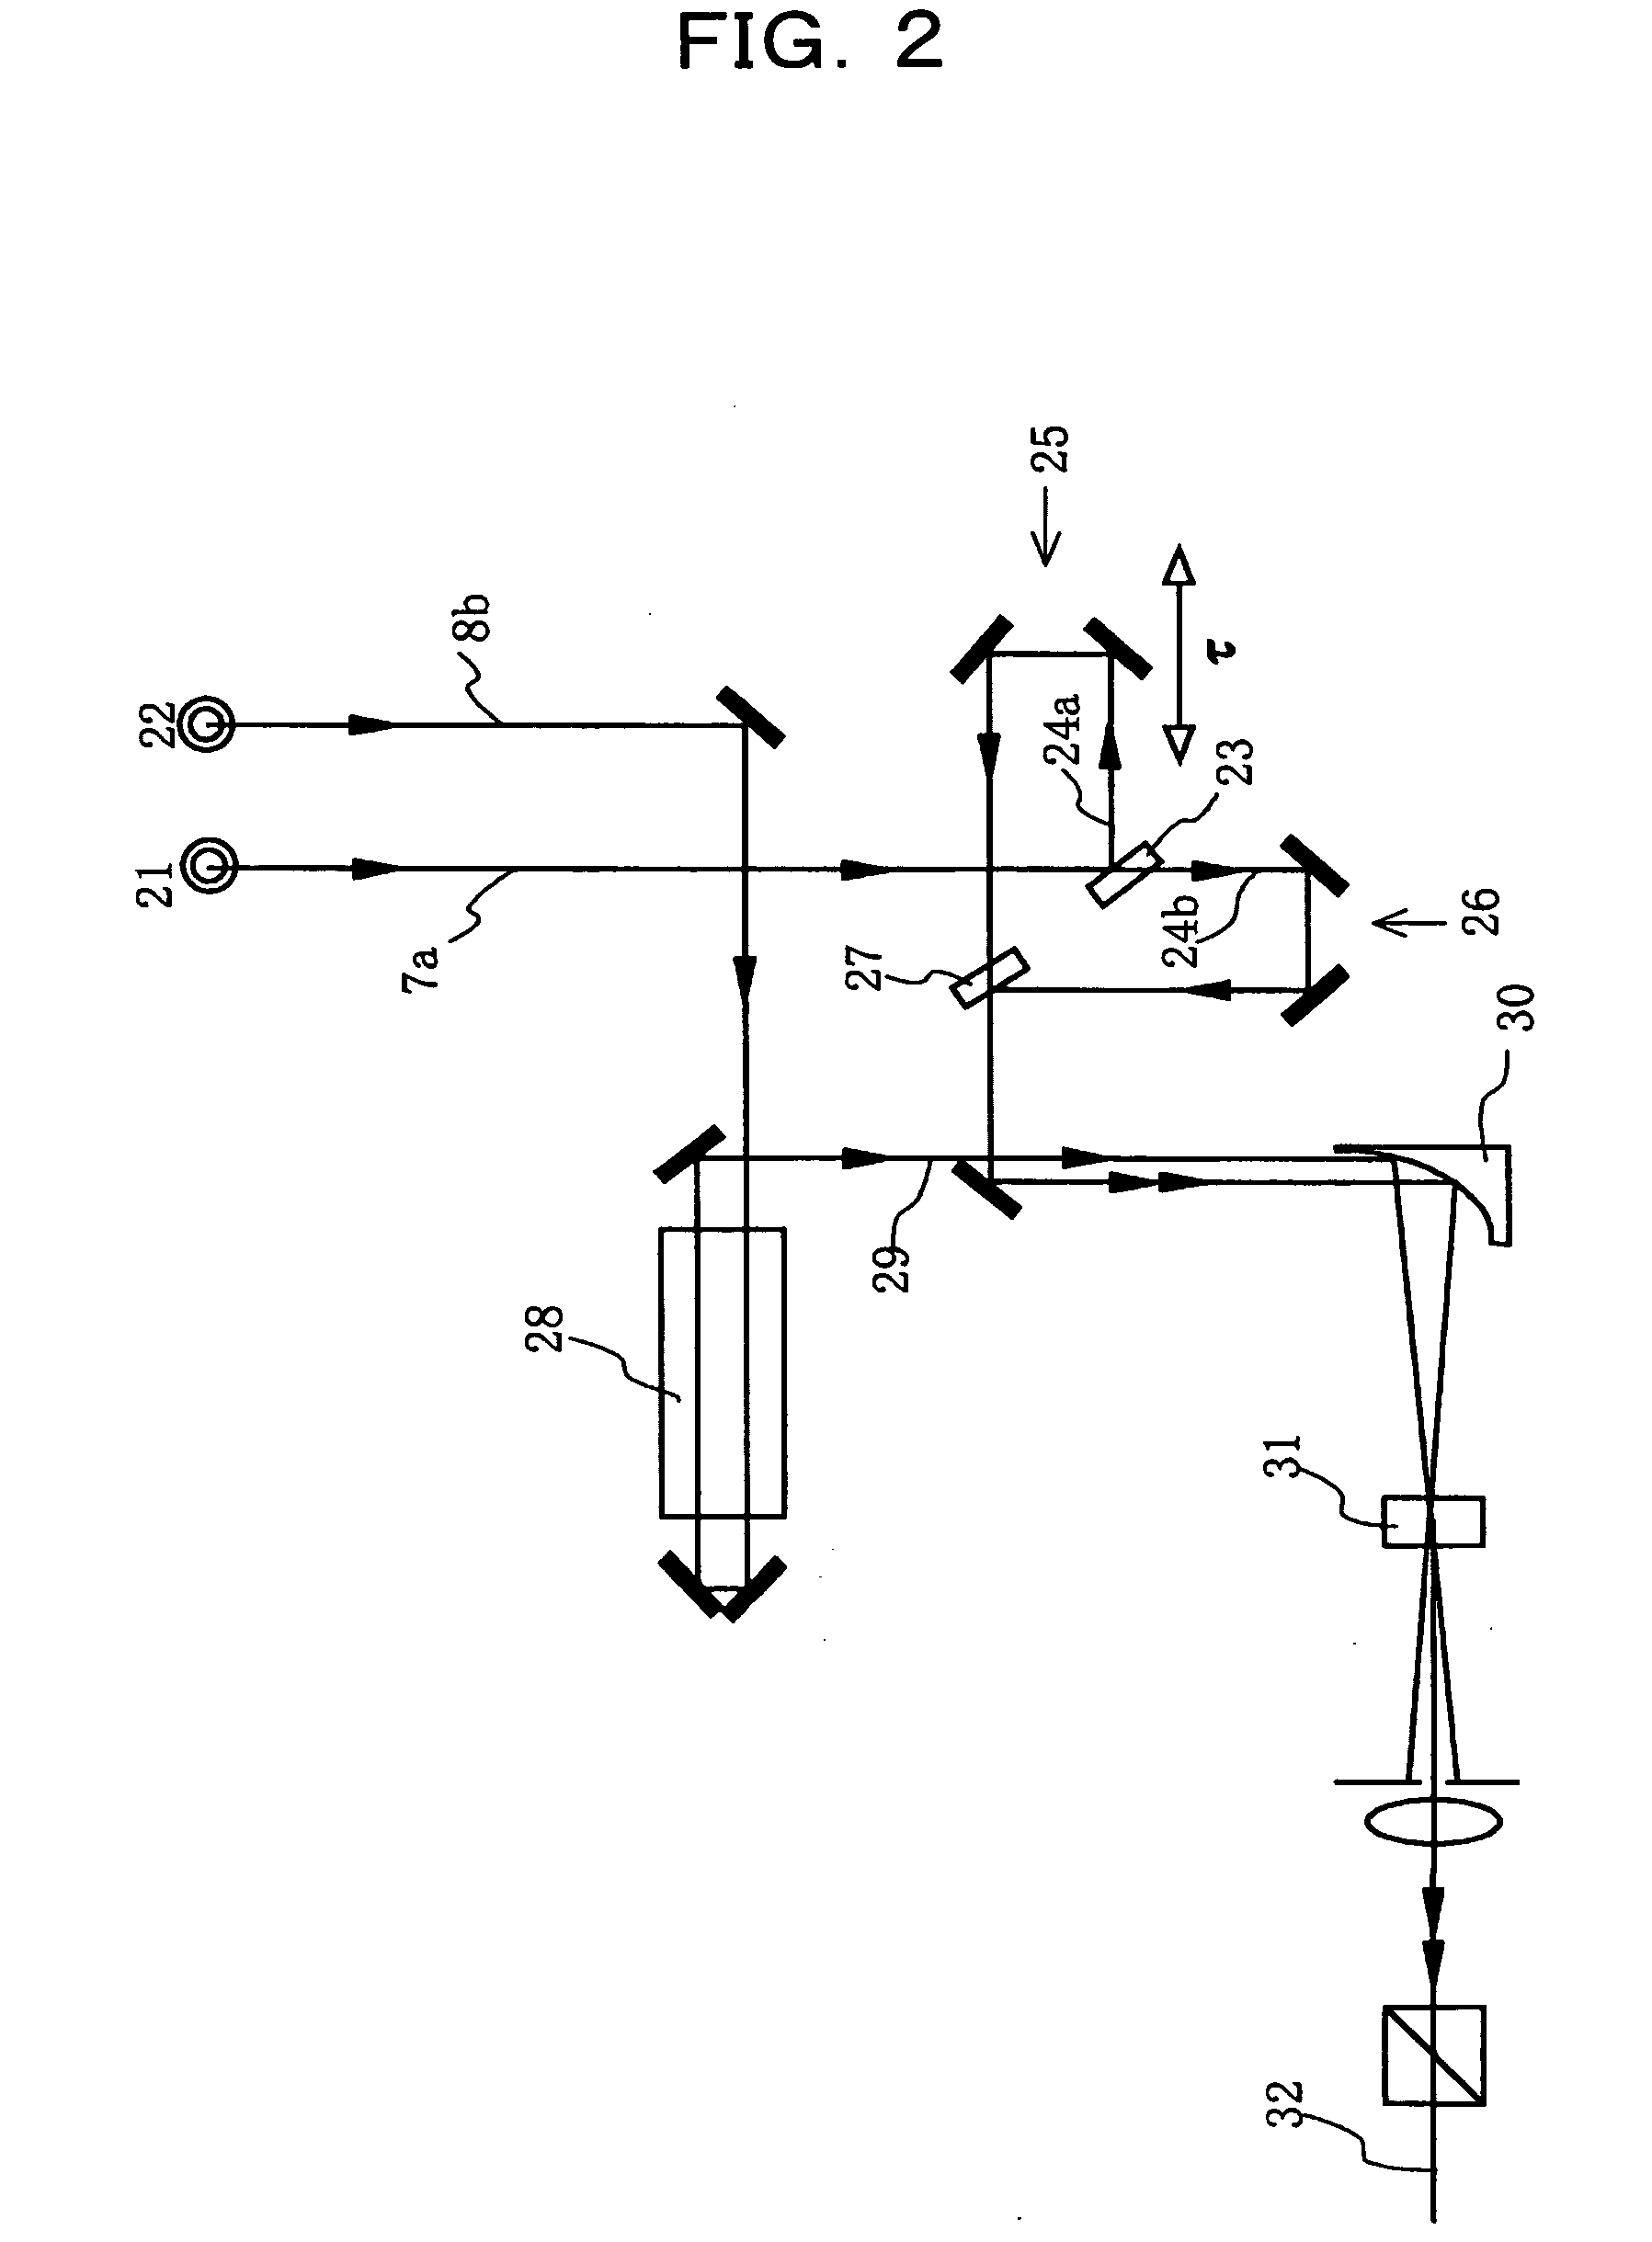 Autonomous ultra-short optical pulse compression, phase compensating and waveform shaping device